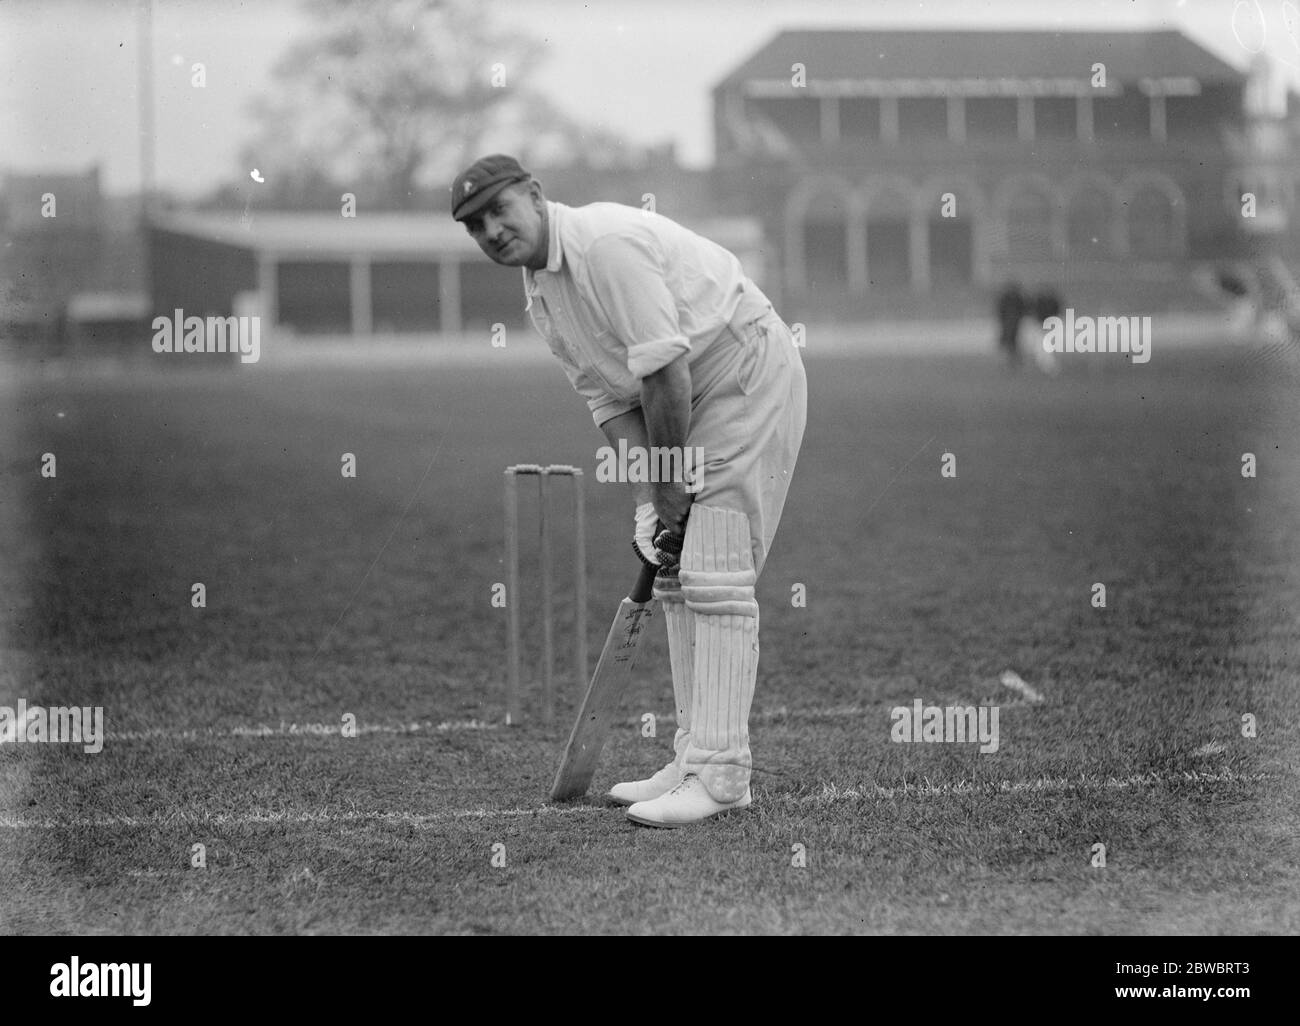 South African cricketers practice at the oval Philip Albert Myburgh Hands a right handed batsman taking his stance at the crease 26 April 1924 Stock Photo